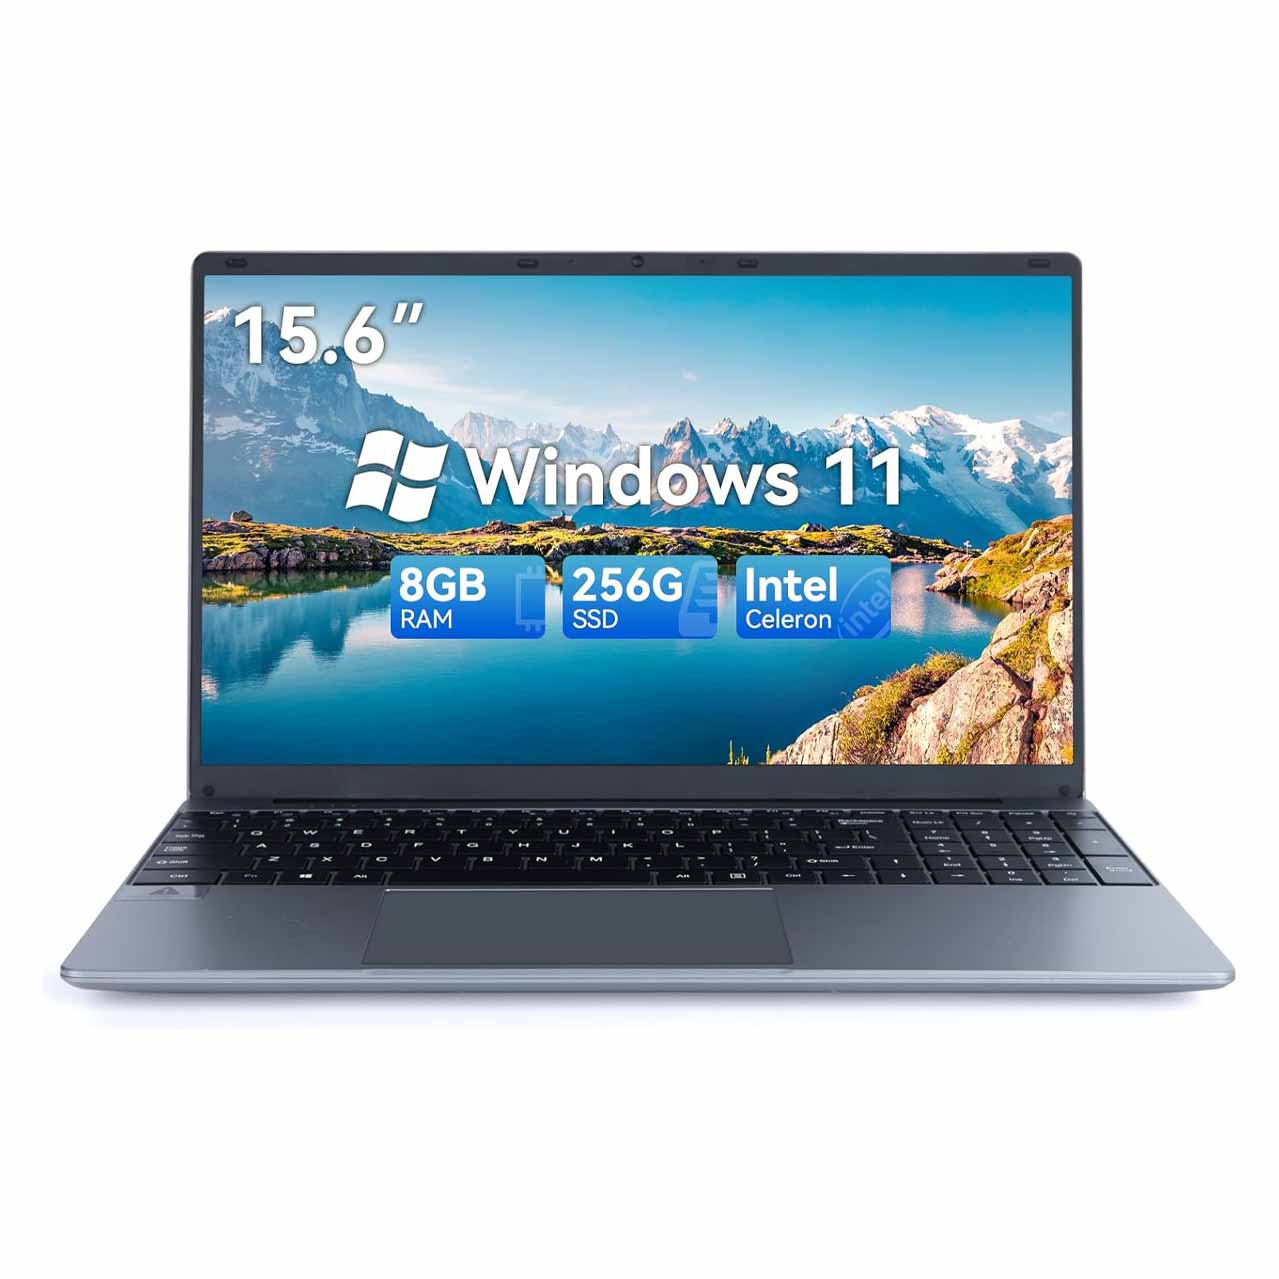 Chicbuy 15.6'' Laptop Computer with windows 11 on its display screen